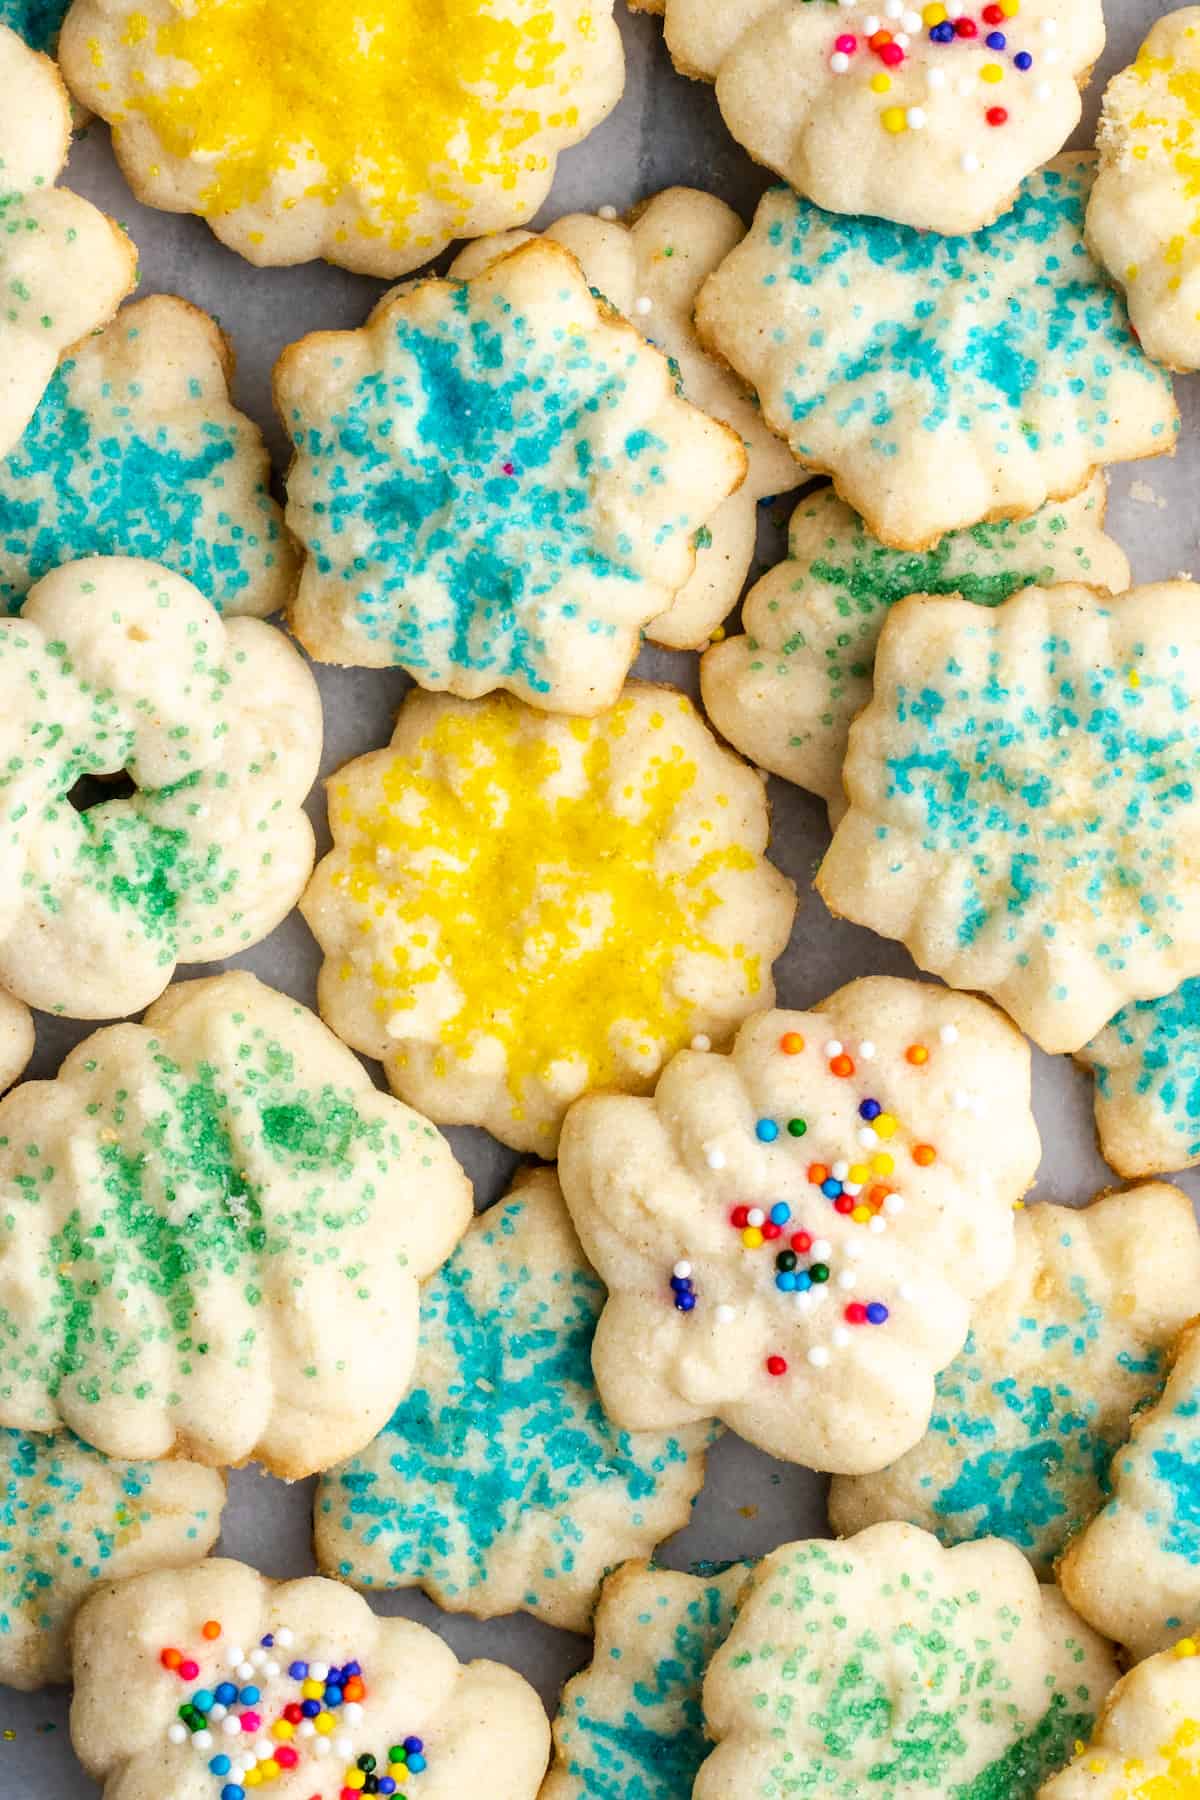 Overhead view of a pile of spritz cookies covered in different colors of sprinkles